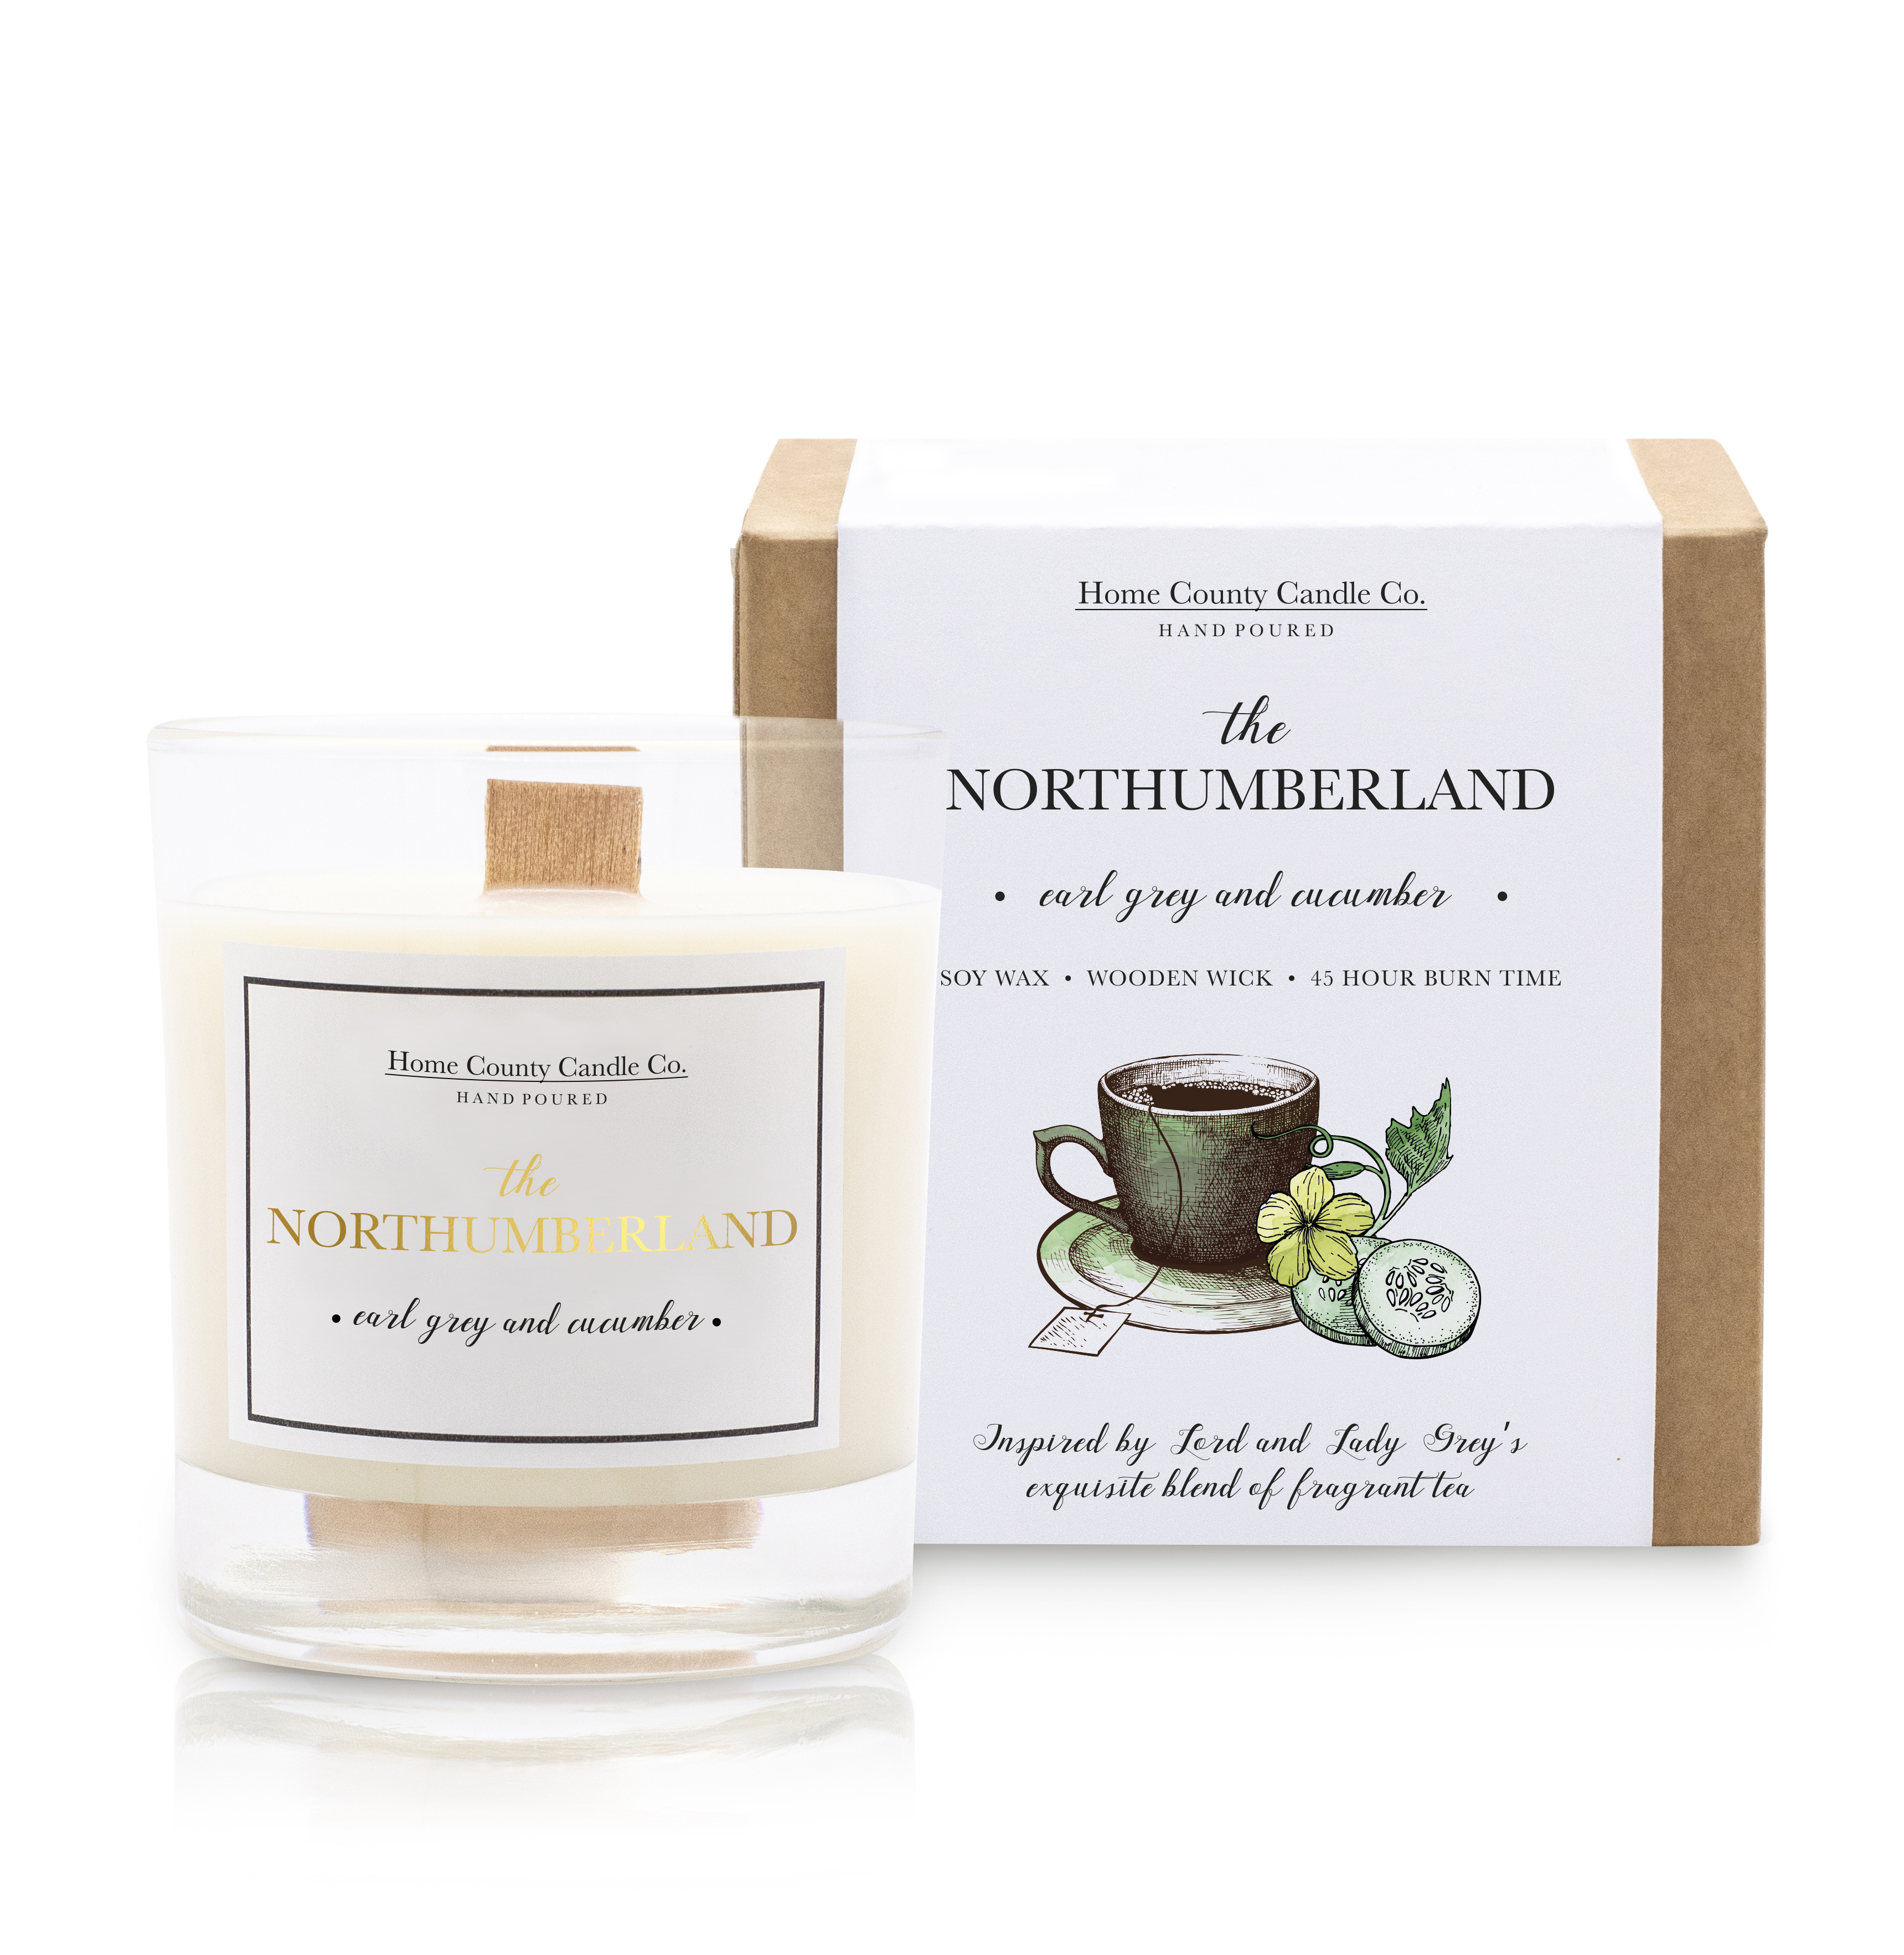 Home County Candle The Northumberland Earl Grey and Cucumber Candle